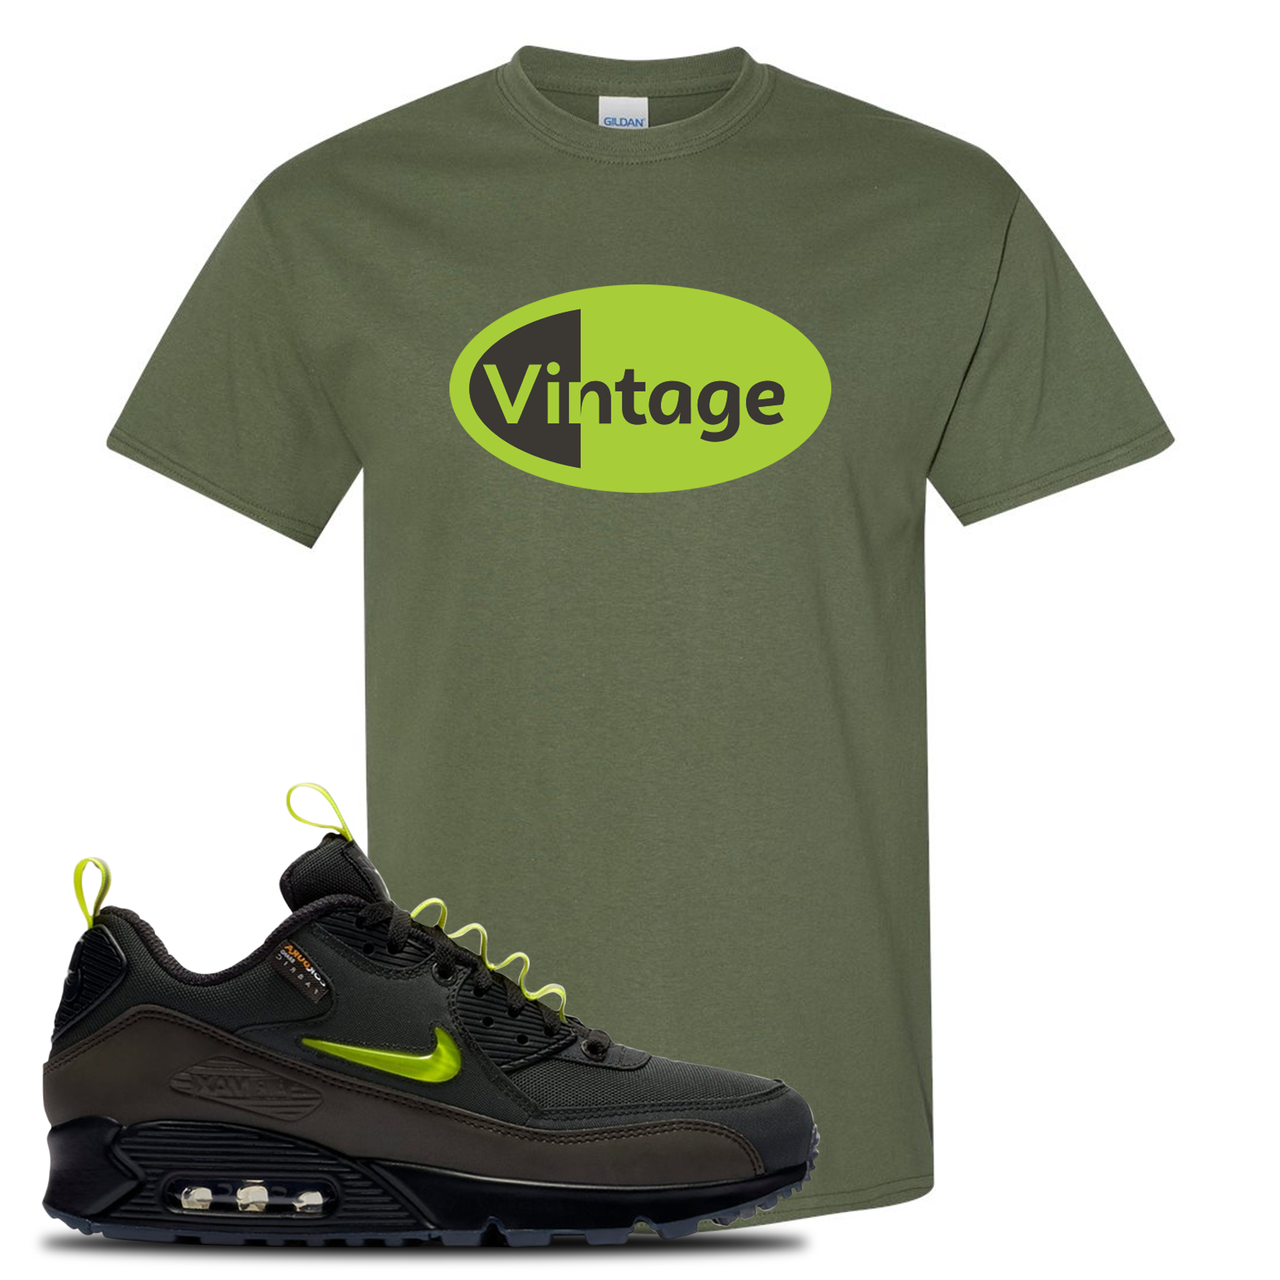 The Basement X Air Max 90 Manchester Vintage Oval Military Green Sneaker Hook Up T-Shirt